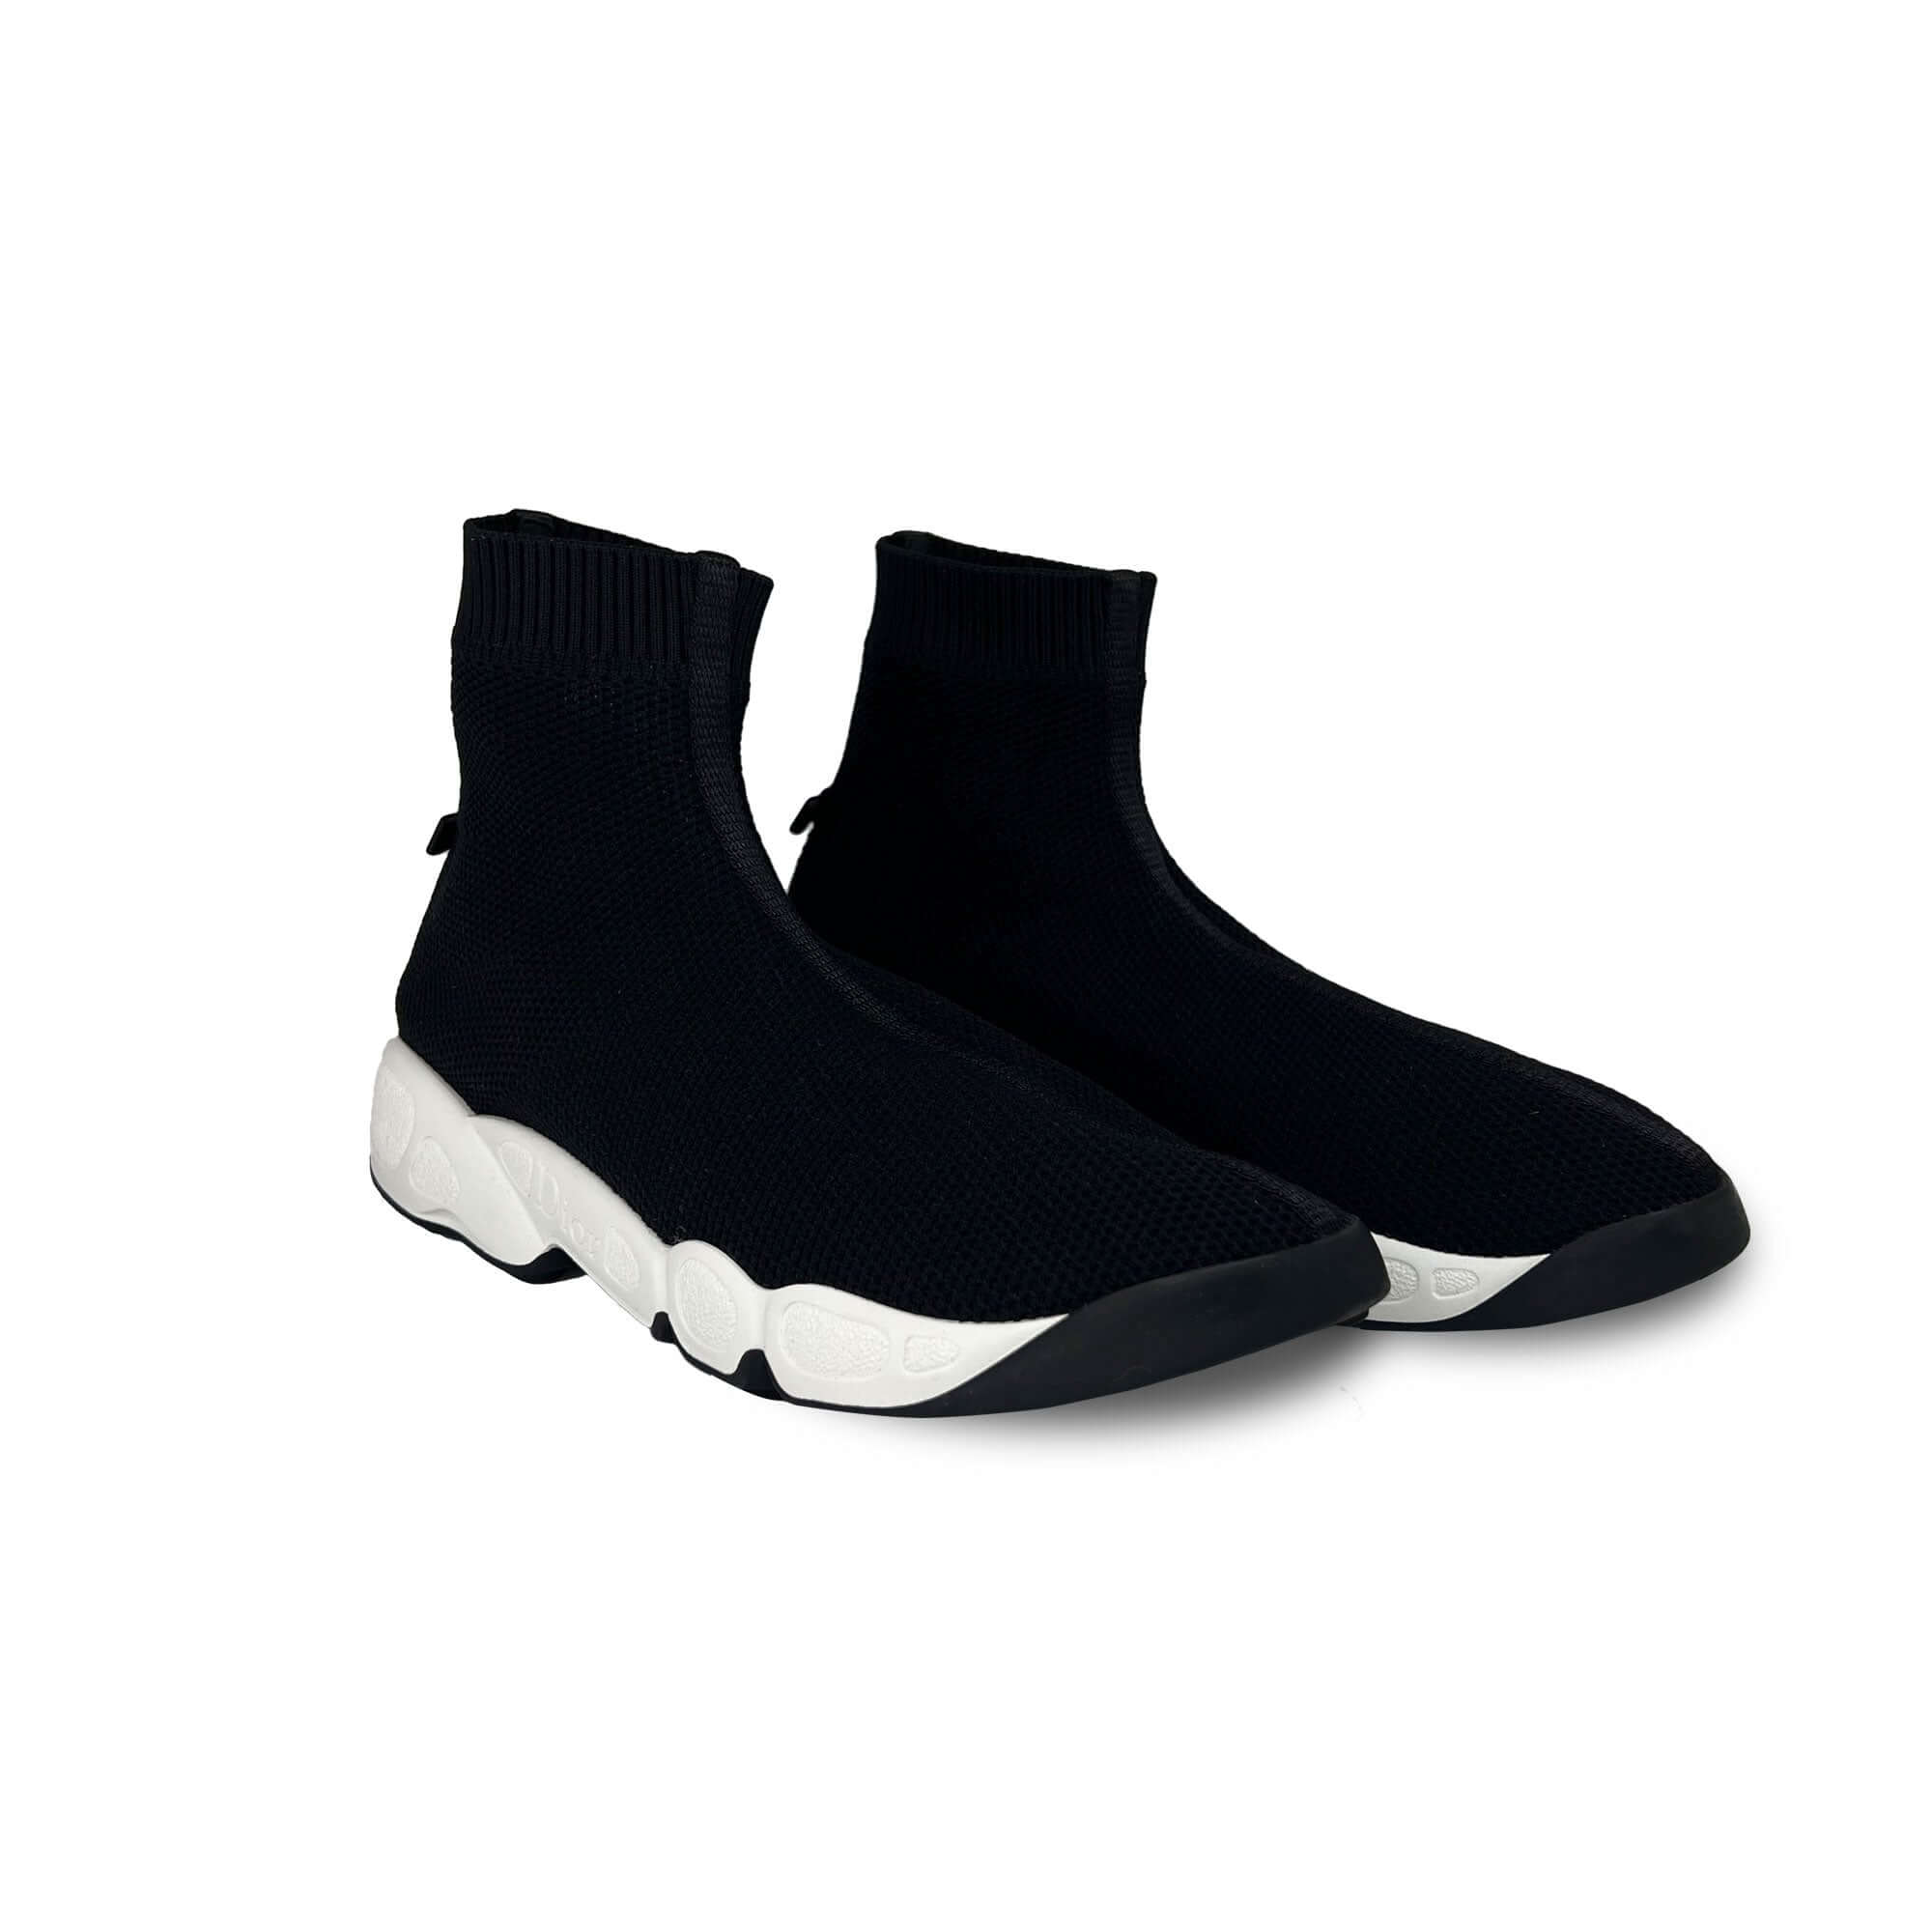 Christian Dior fusion 2.0 high top sock sneakers